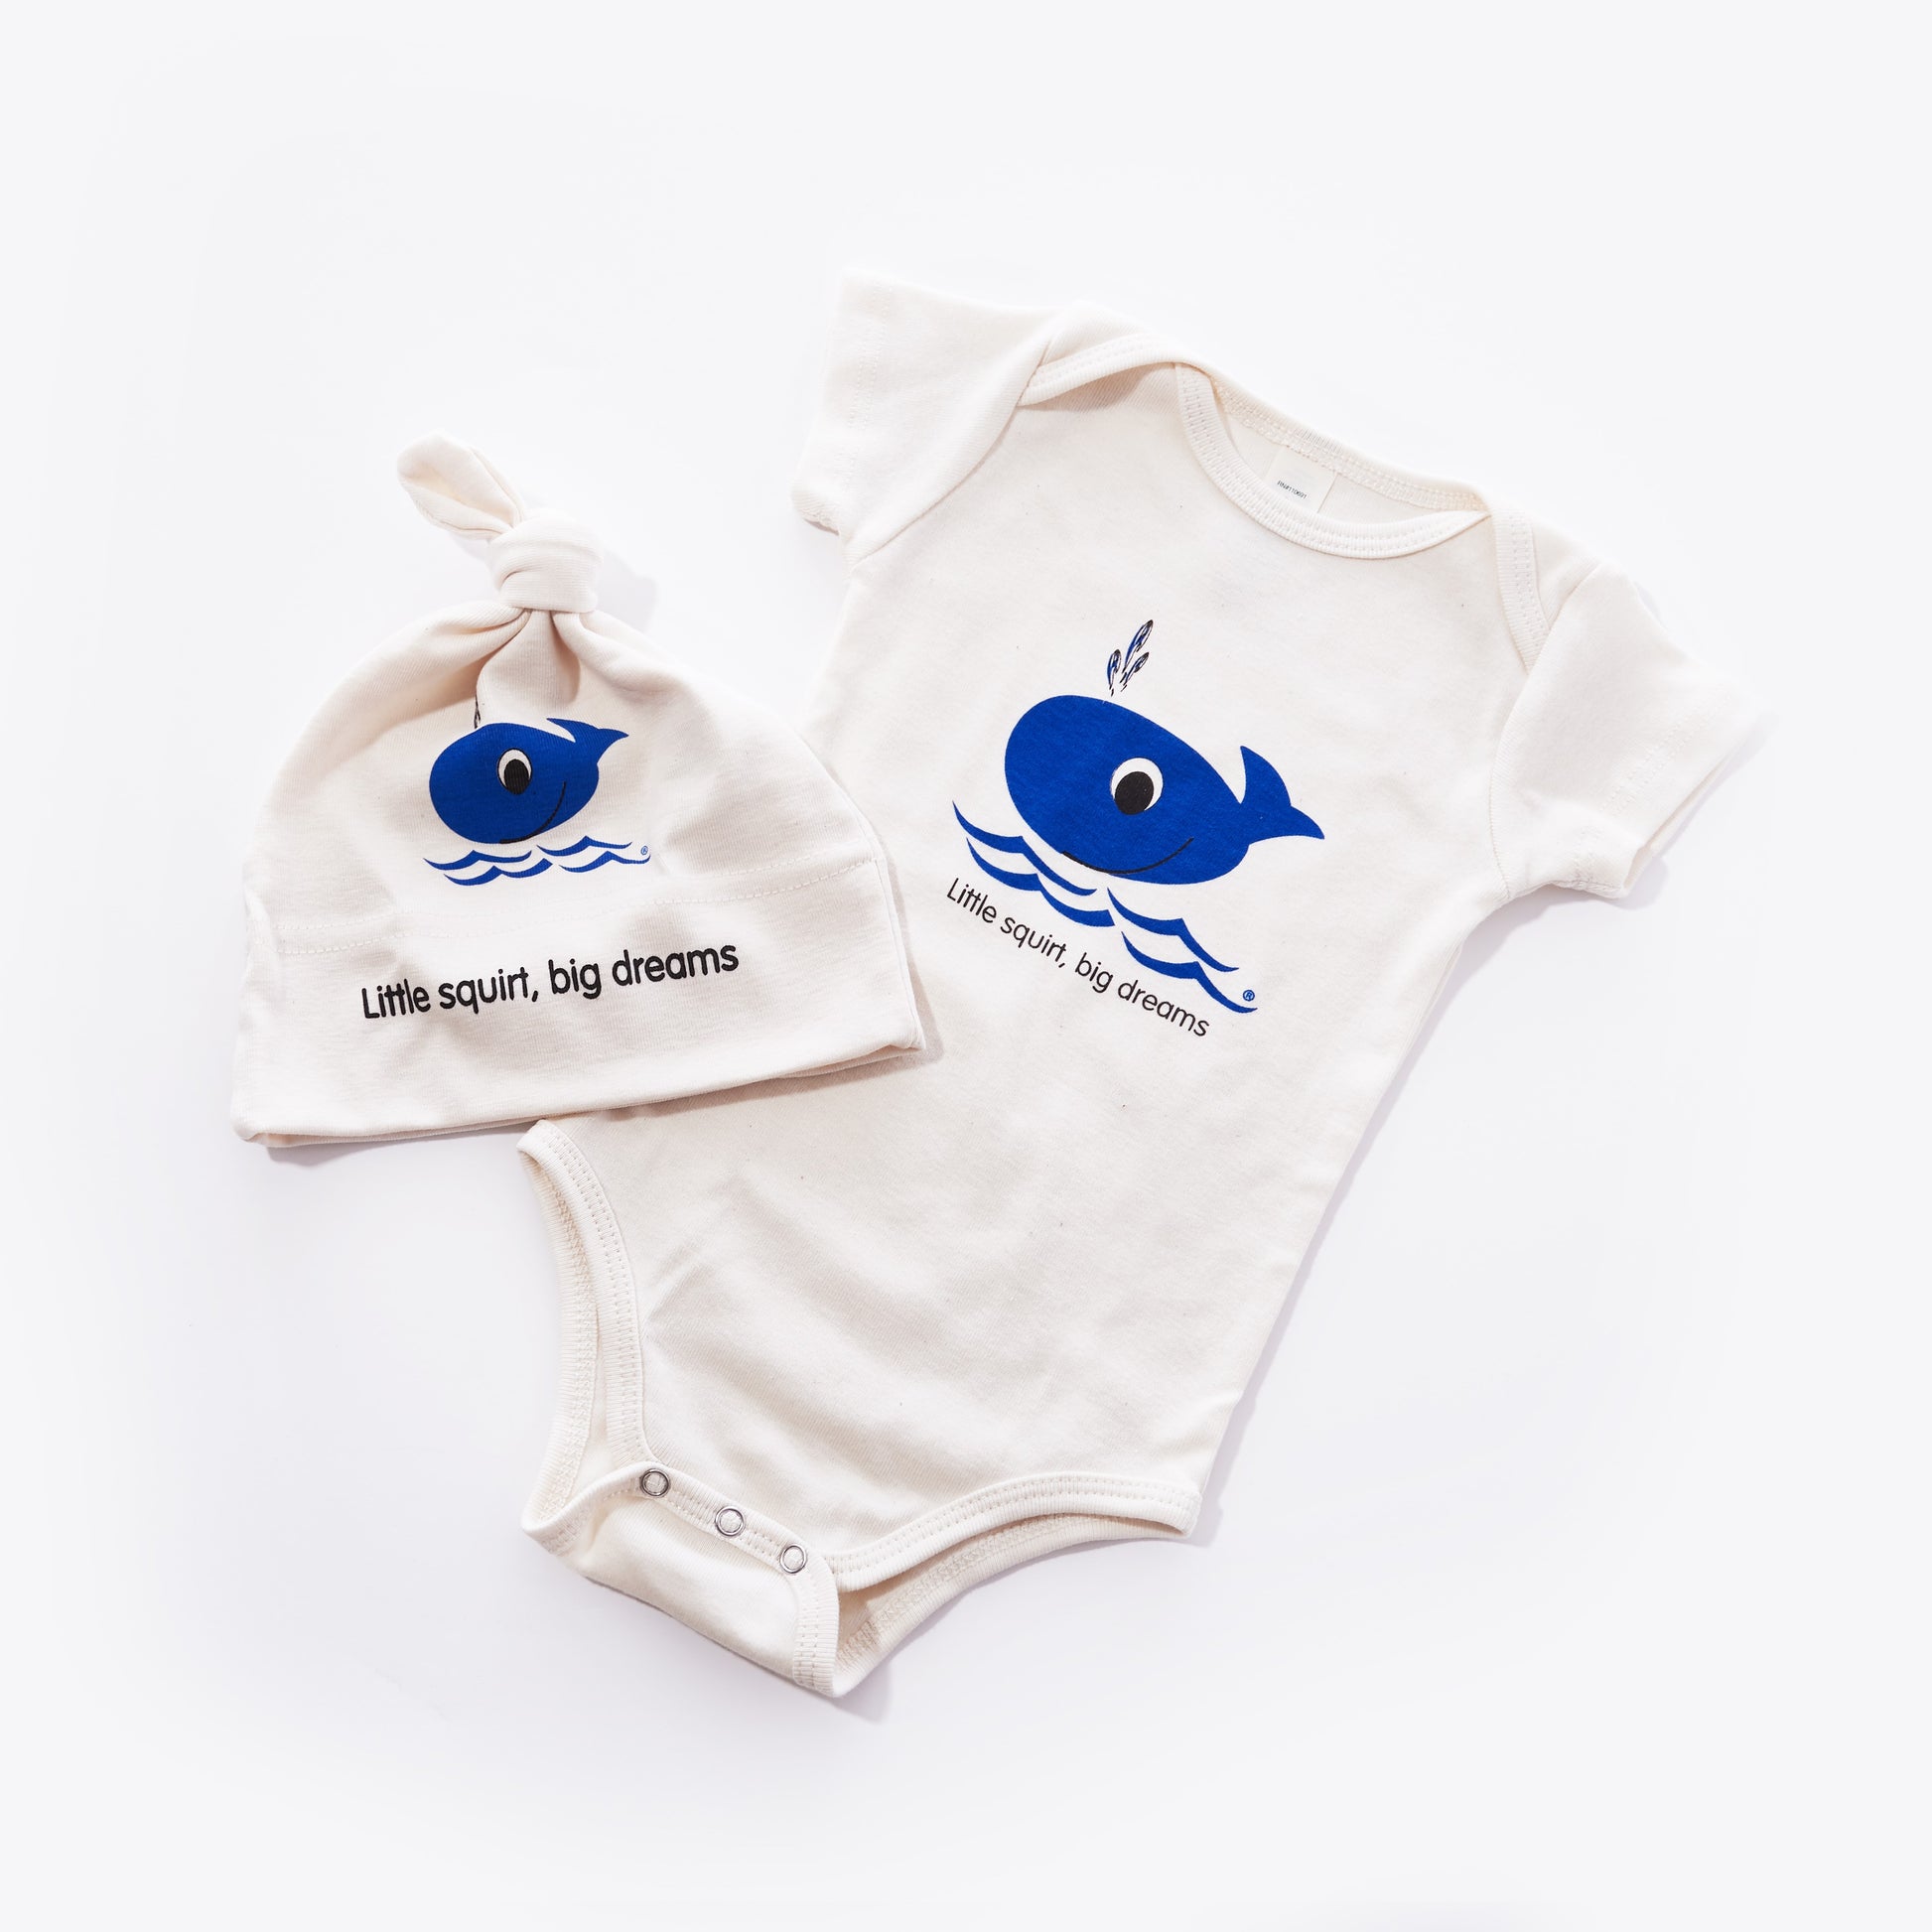 Organic cotton baby gift set - Whale - Simply Chickie